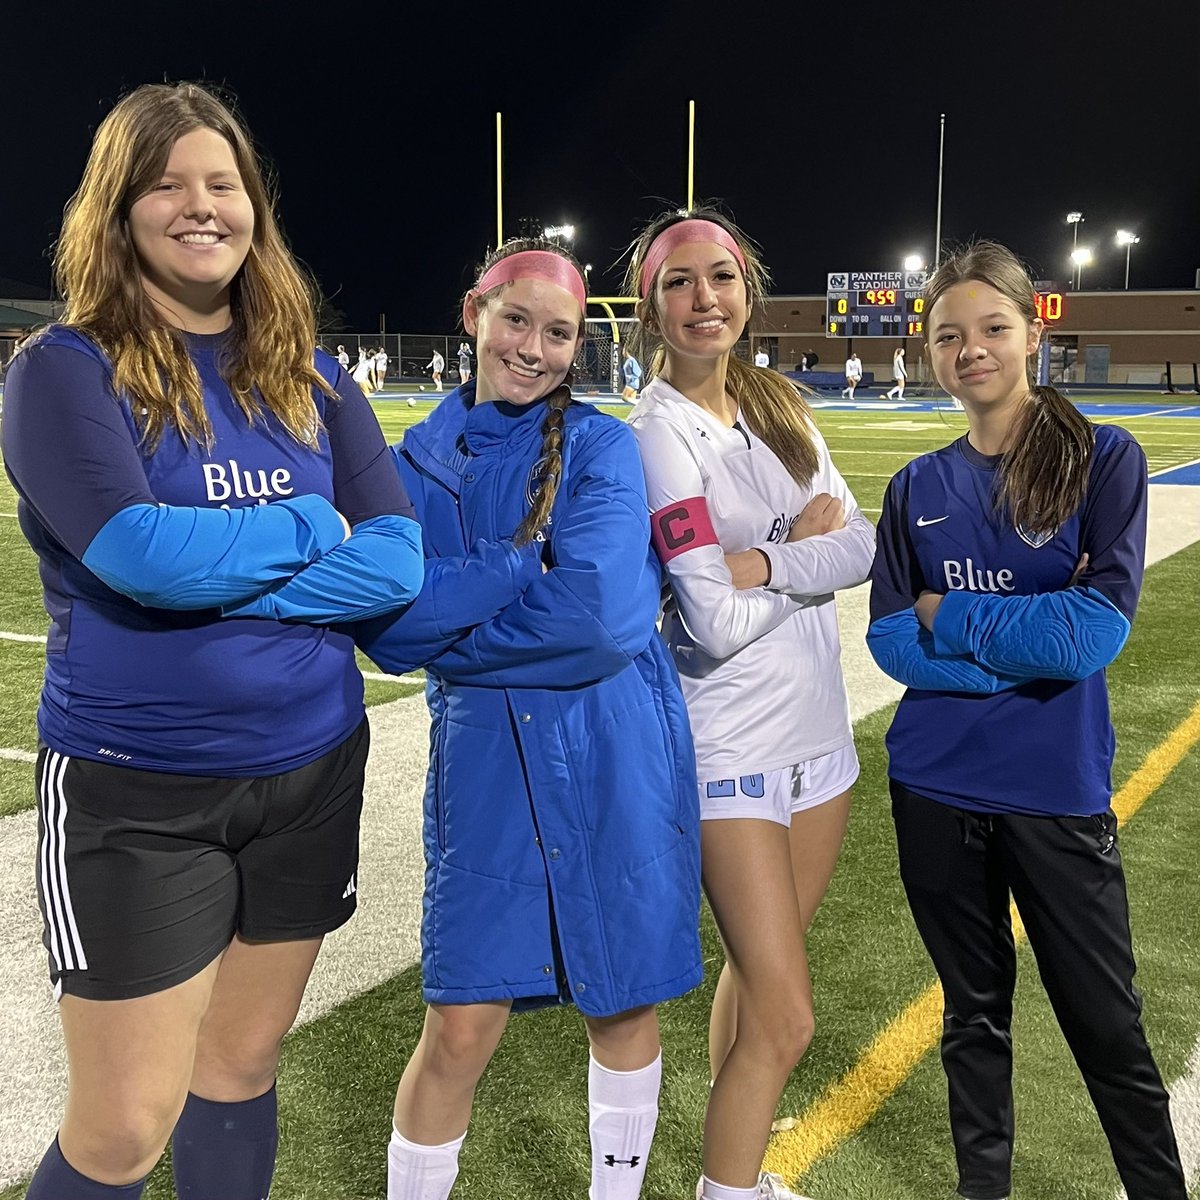 Two wins last night! The JV got a 4-0 win with Viviani netting a #hattrick!
North Crowley made life tough for the Varsity but they eventually prevailed with a 3-1 win. @Aurora_creevy @SkylarHenley4 & Ashlynn W all scoring
Back at the Penn on Friday
#TurnitUp
#BELLieve